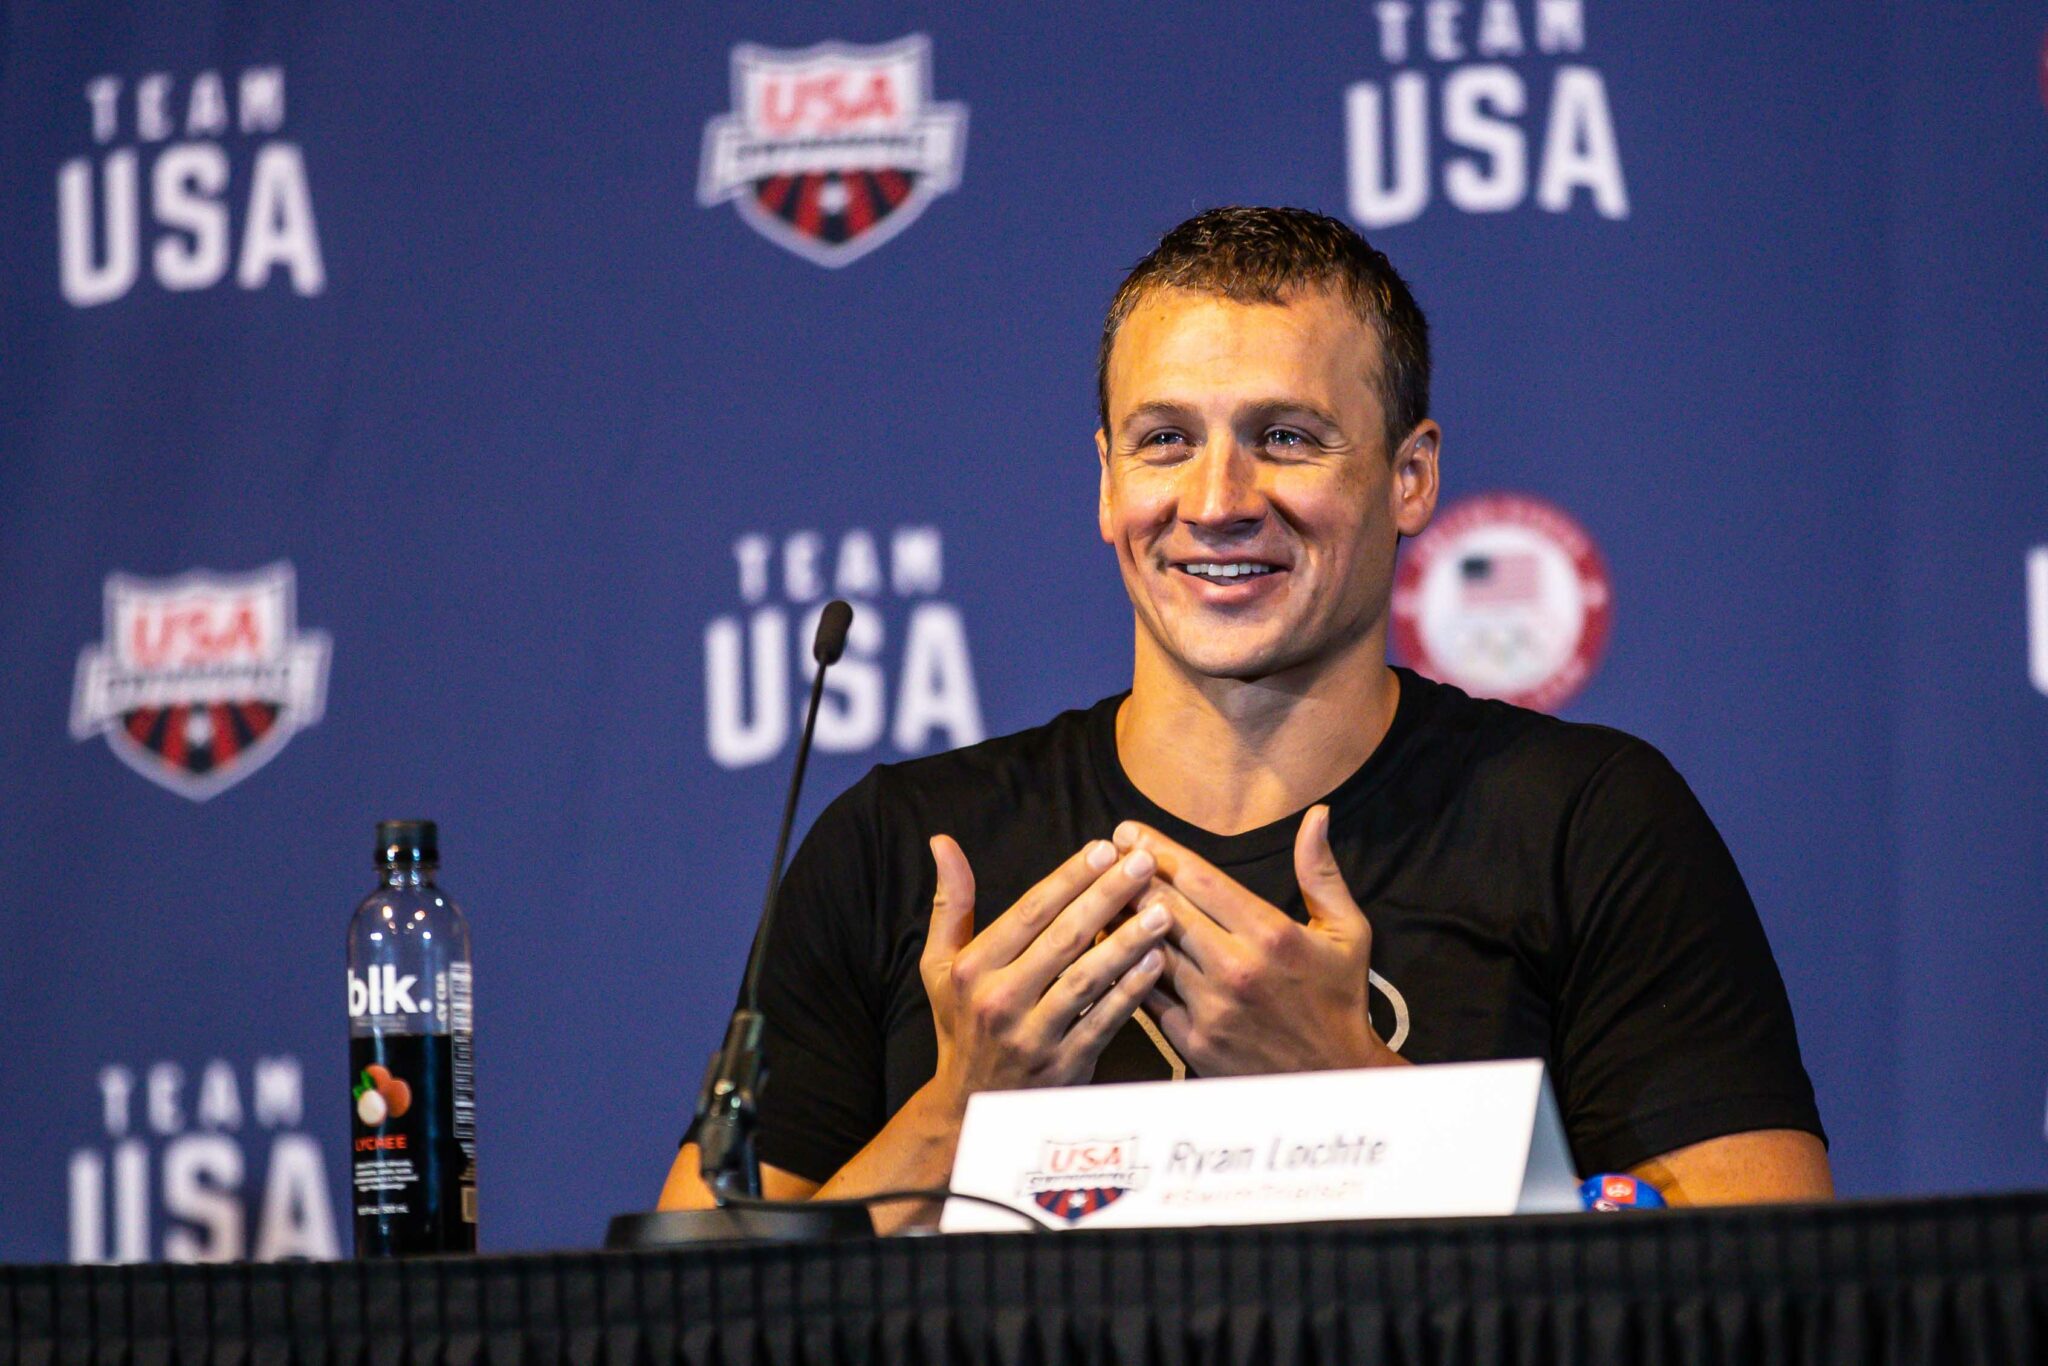 Ryan Lochte confirms his willingness to continue swimming “I’m not retiring”